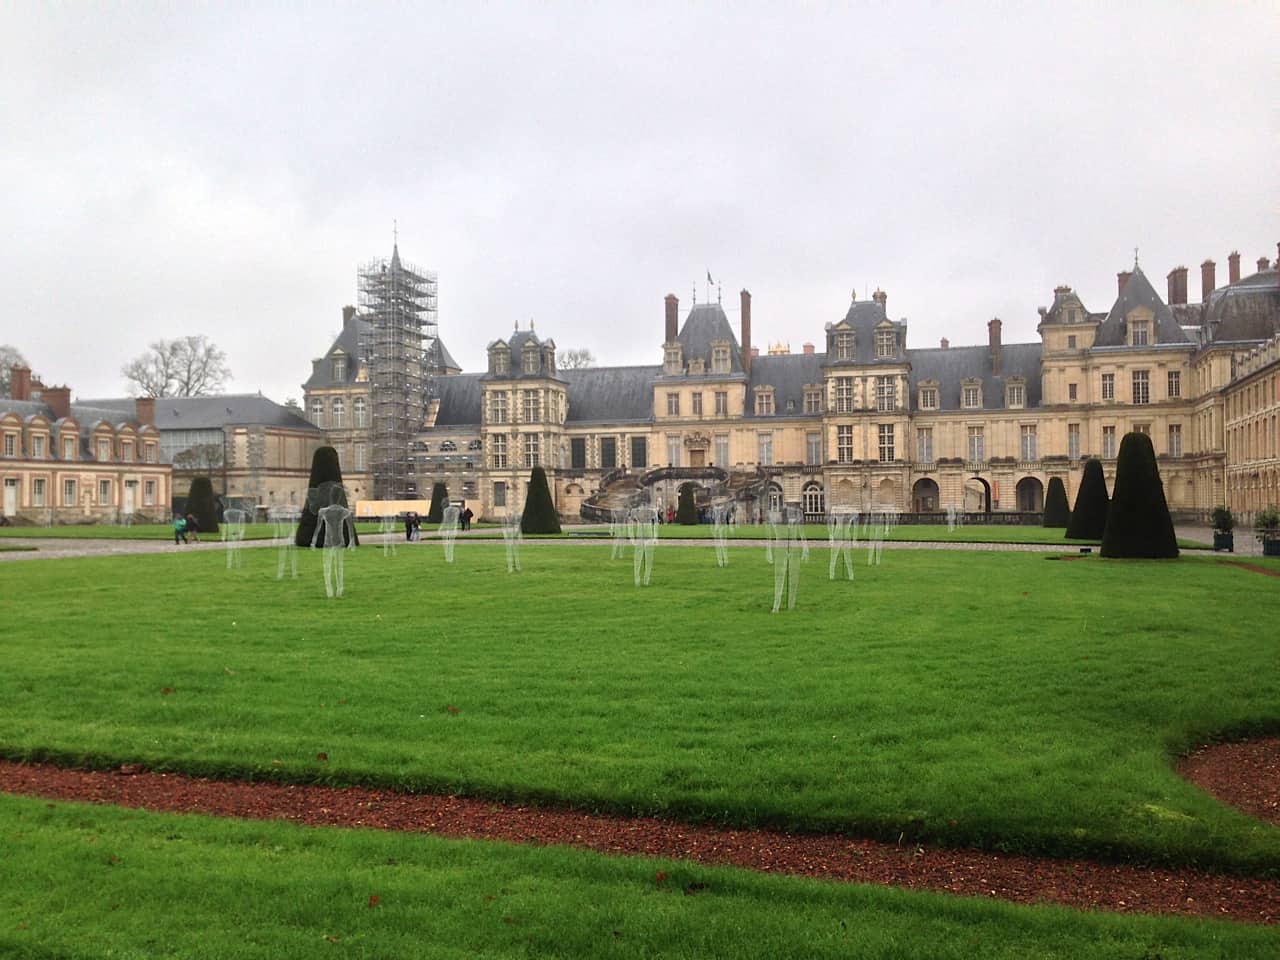 Art installation at Fontainebleau chateau